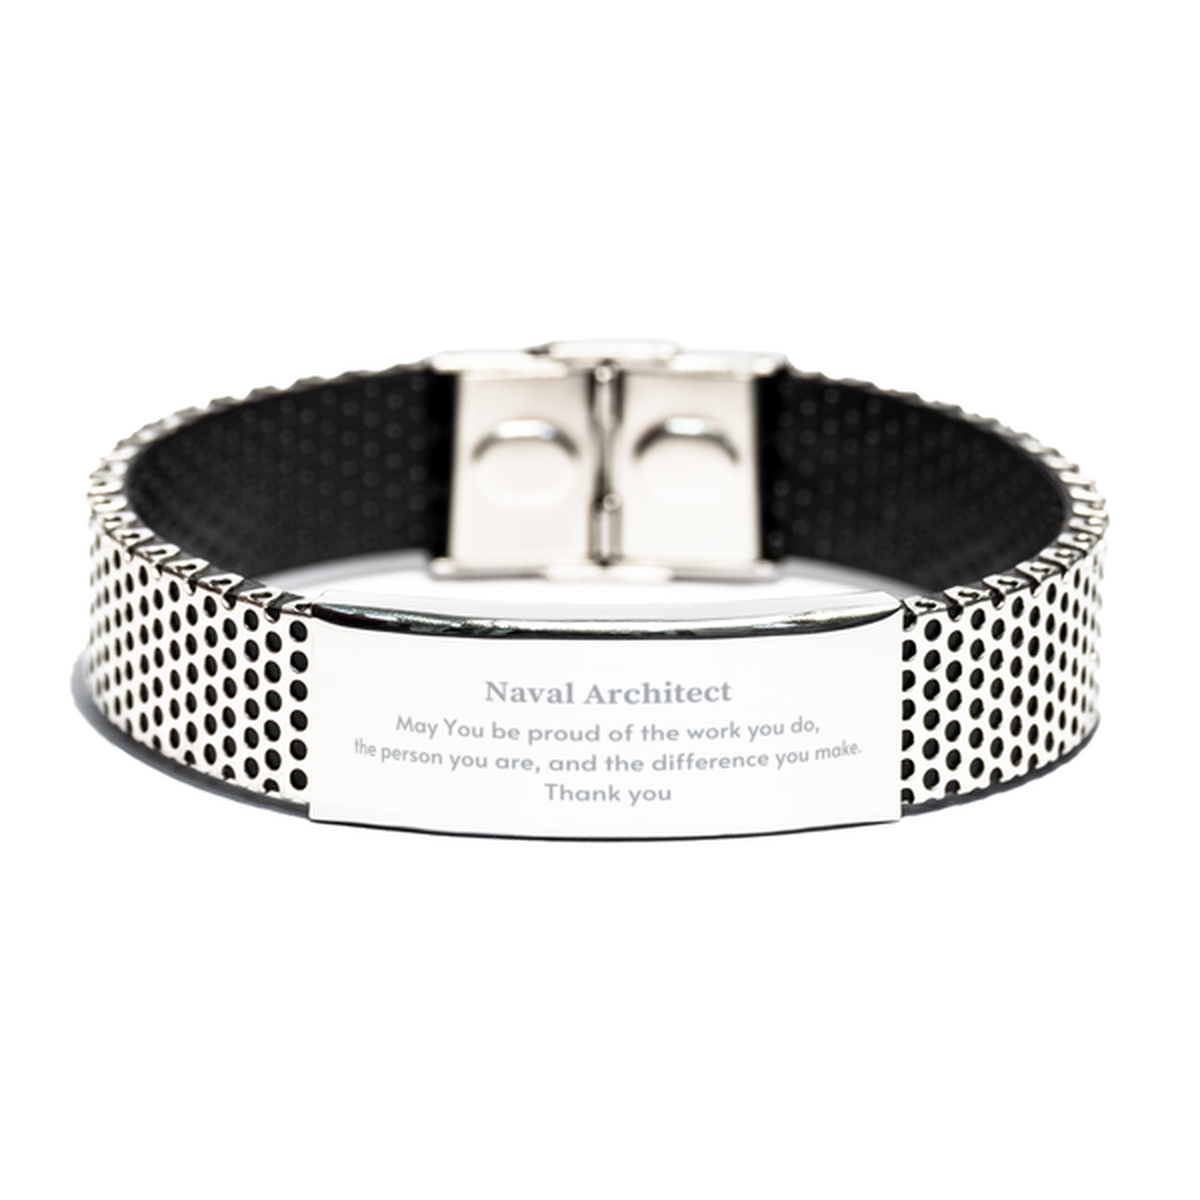 Heartwarming Stainless Steel Bracelet Retirement Coworkers Gifts for Naval Architect, Naval Architect May You be proud of the work you do, the person you are Gifts for Boss Men Women Friends